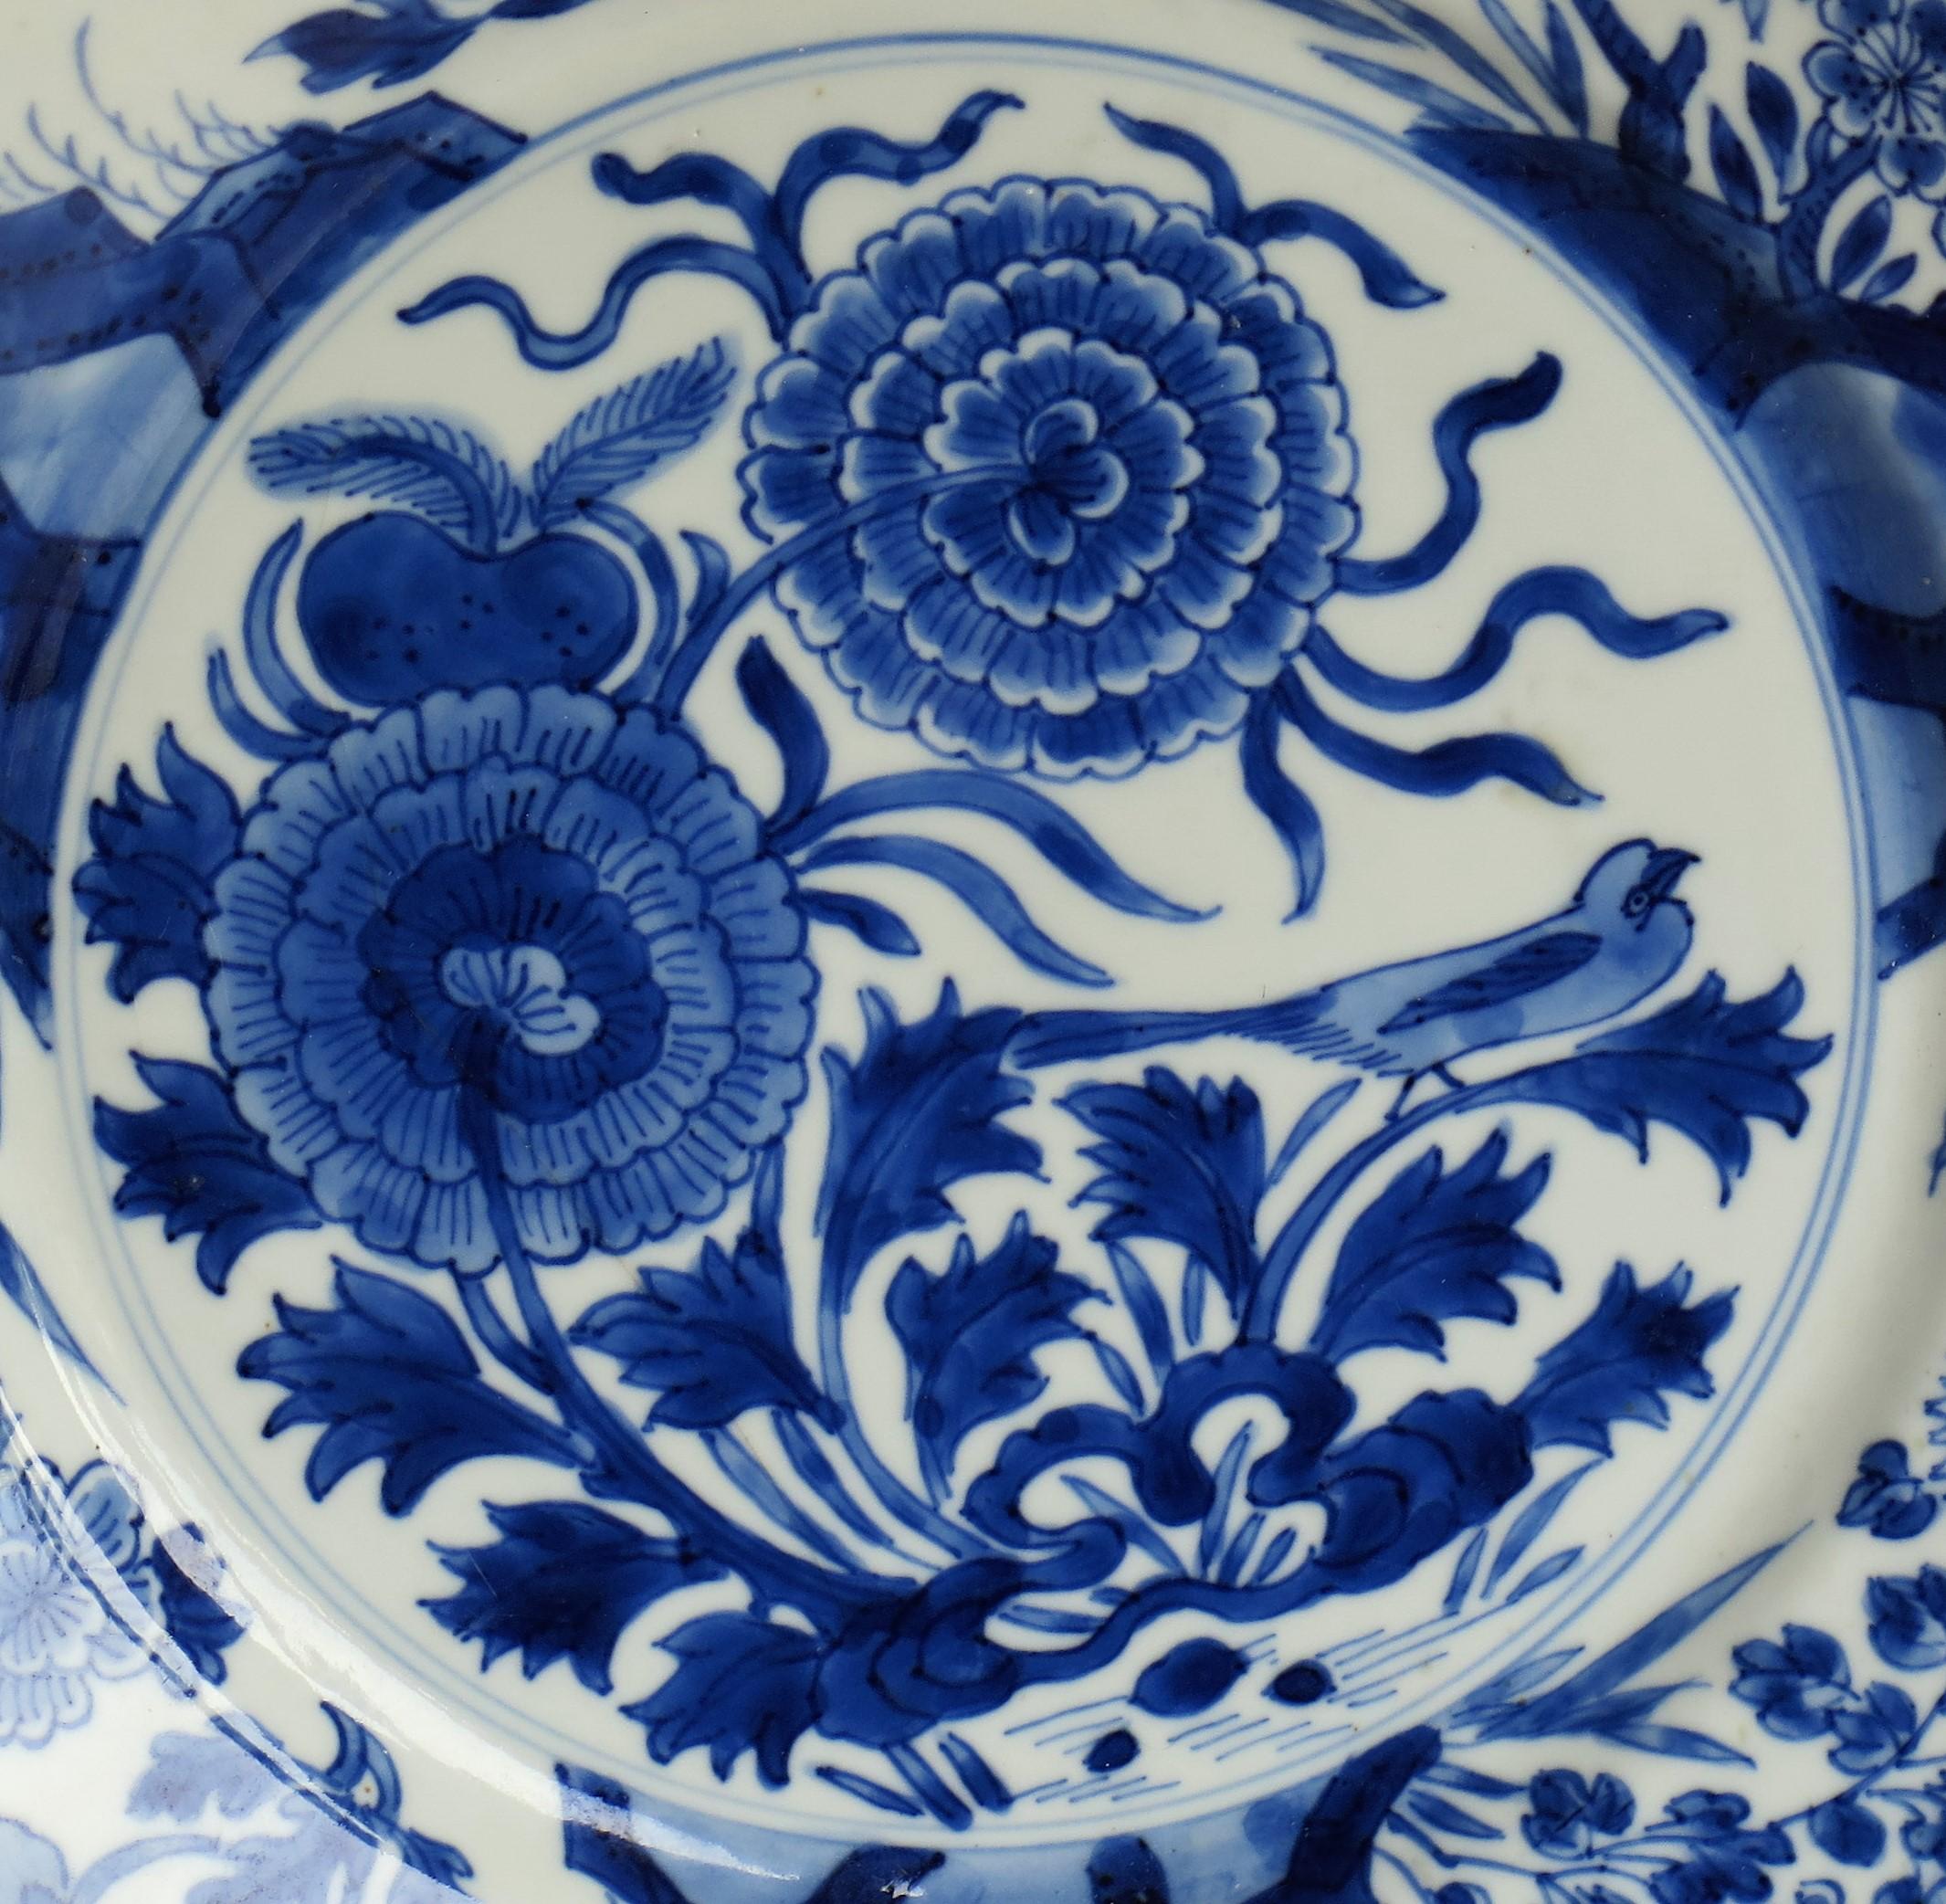 17th Century Fine Chinese Porcelain Blue and White Plate, Kangxi Period & Mark, circa 1700